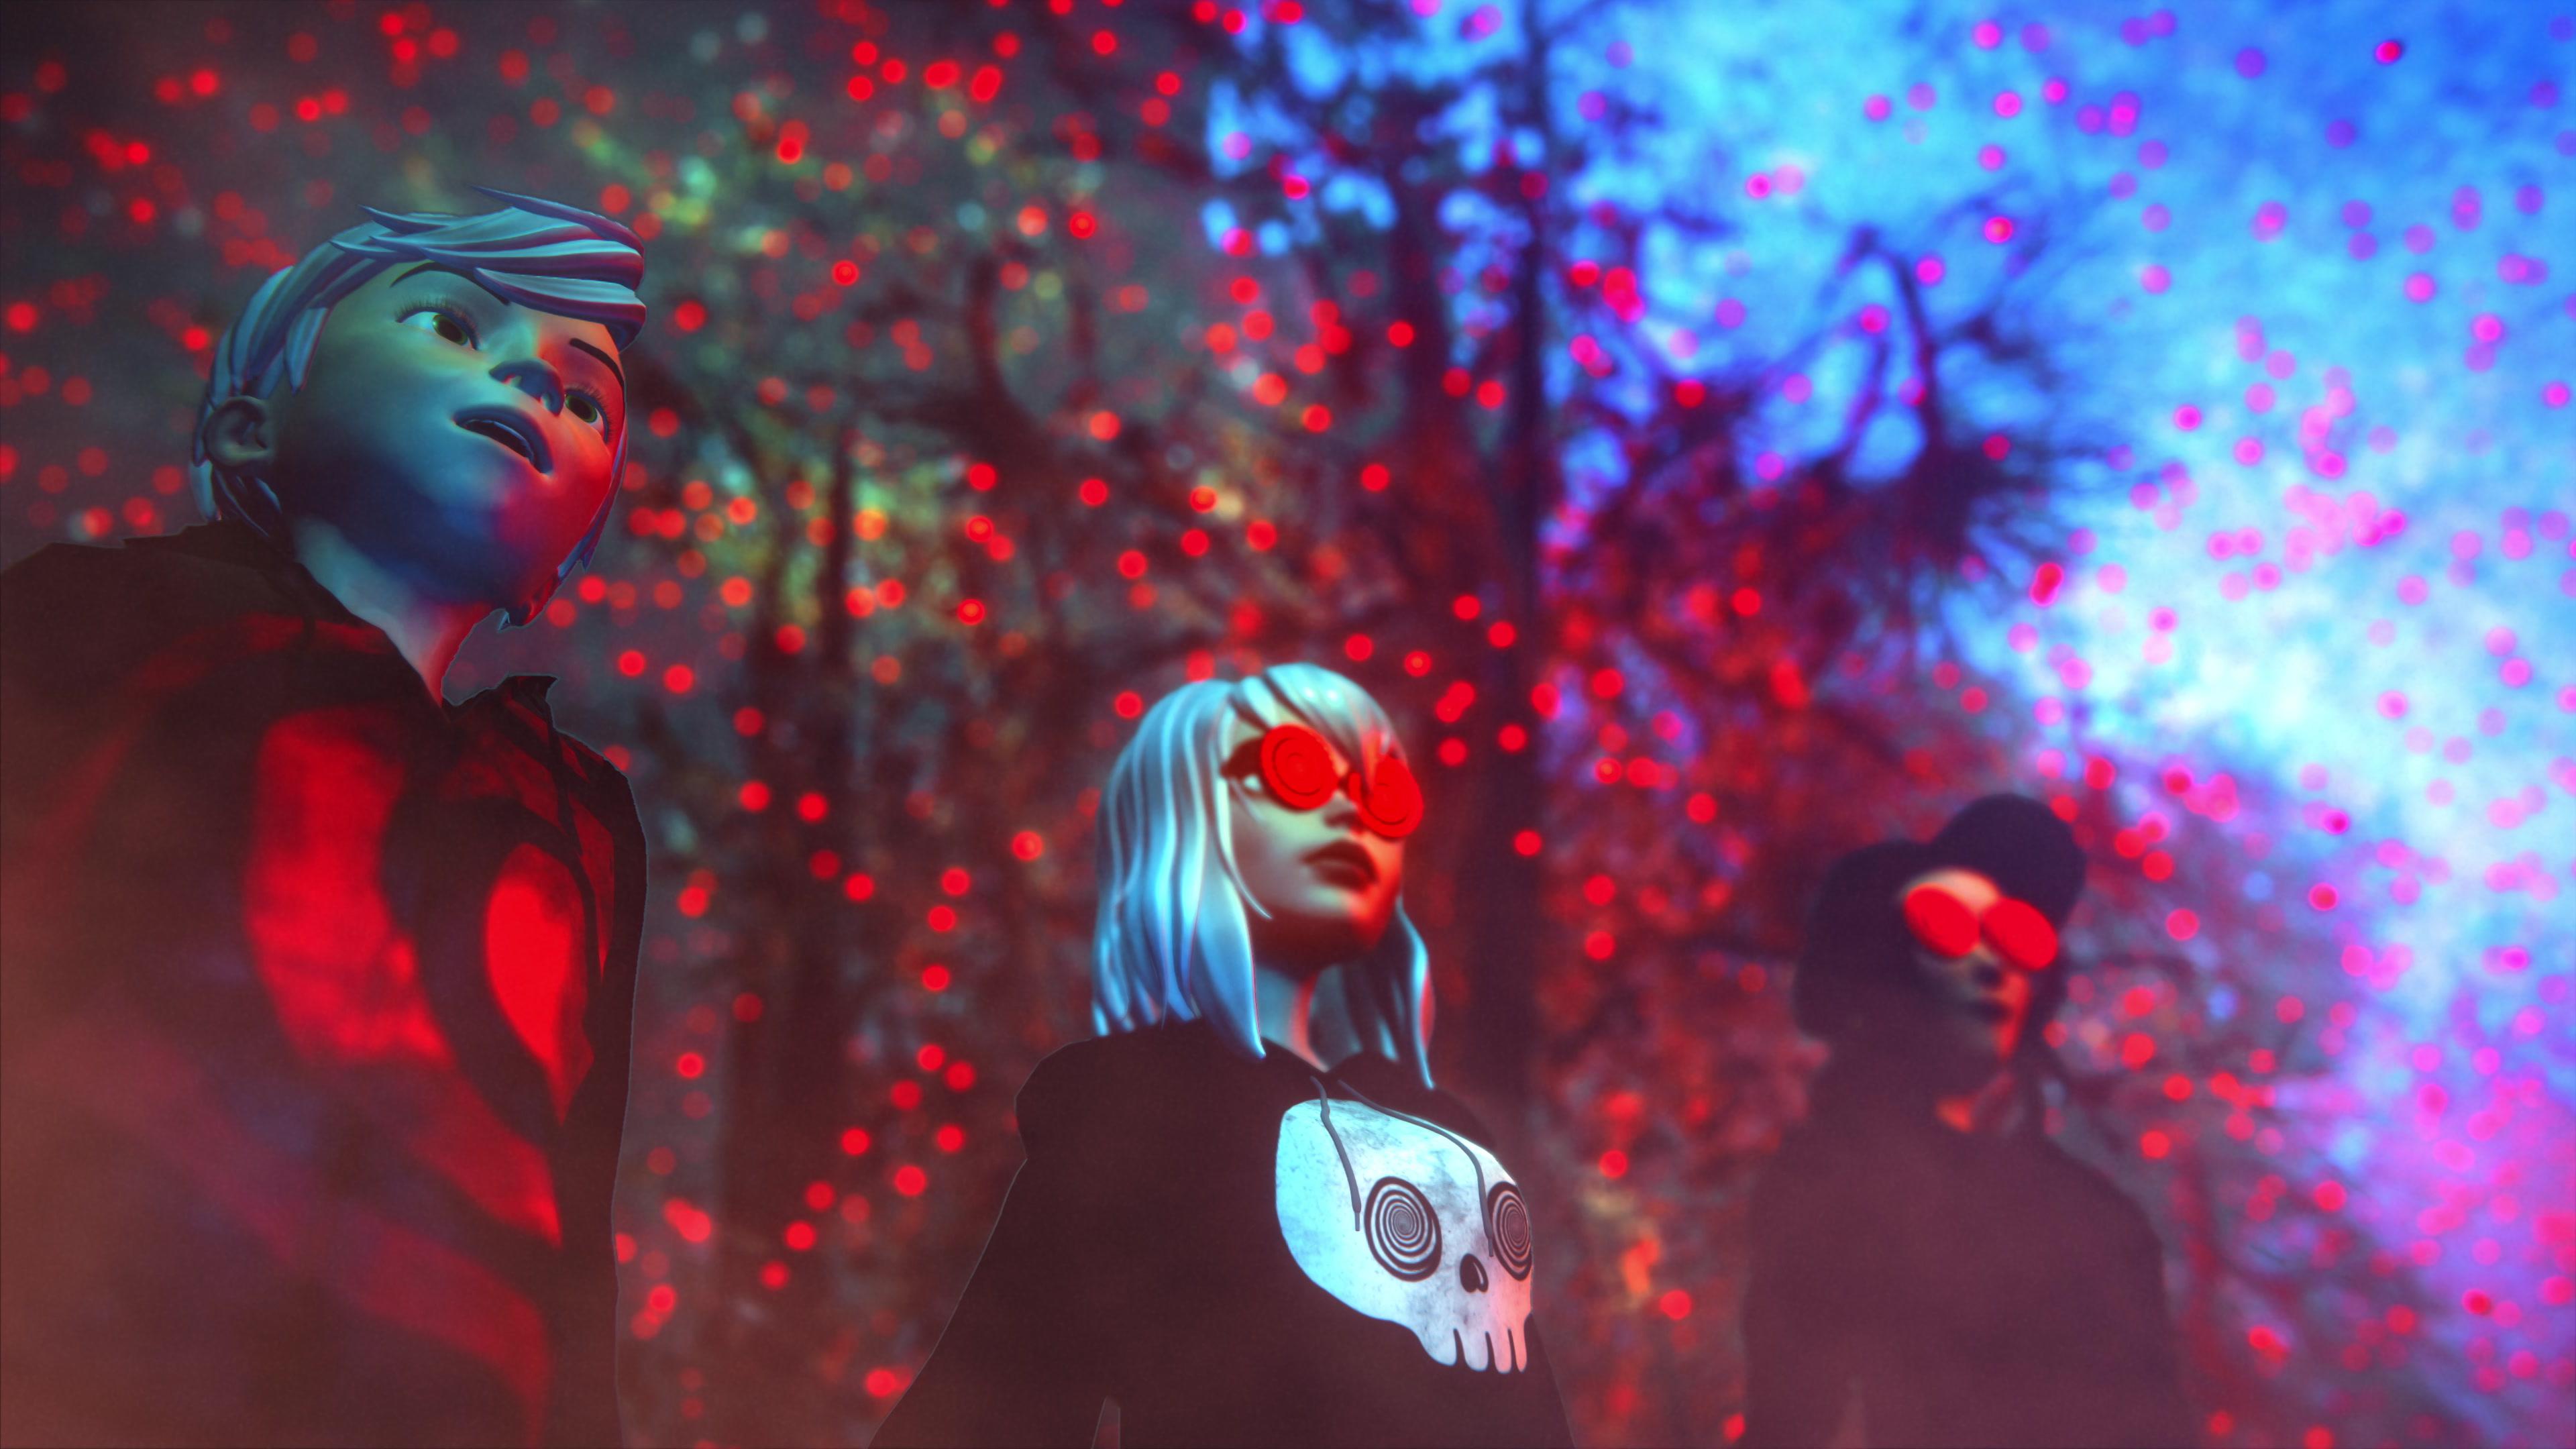 Rezz - Out Of My Head (Official Video)